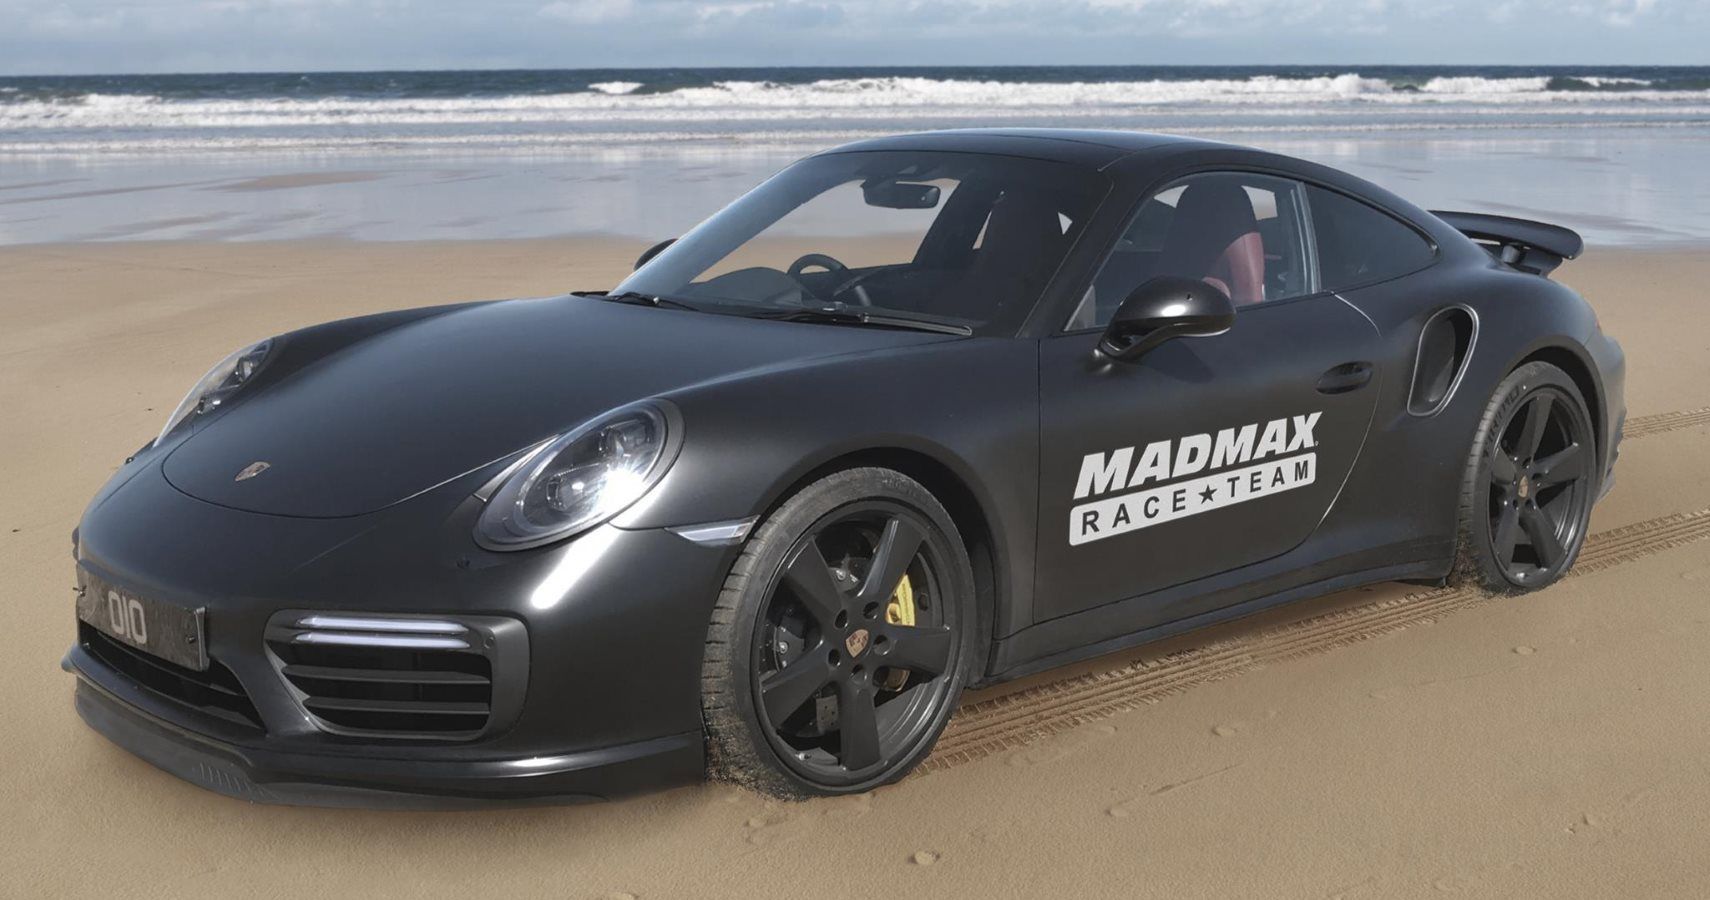 Incredibly Powerful Porsche Aims To Be Fastest Beach Crawler